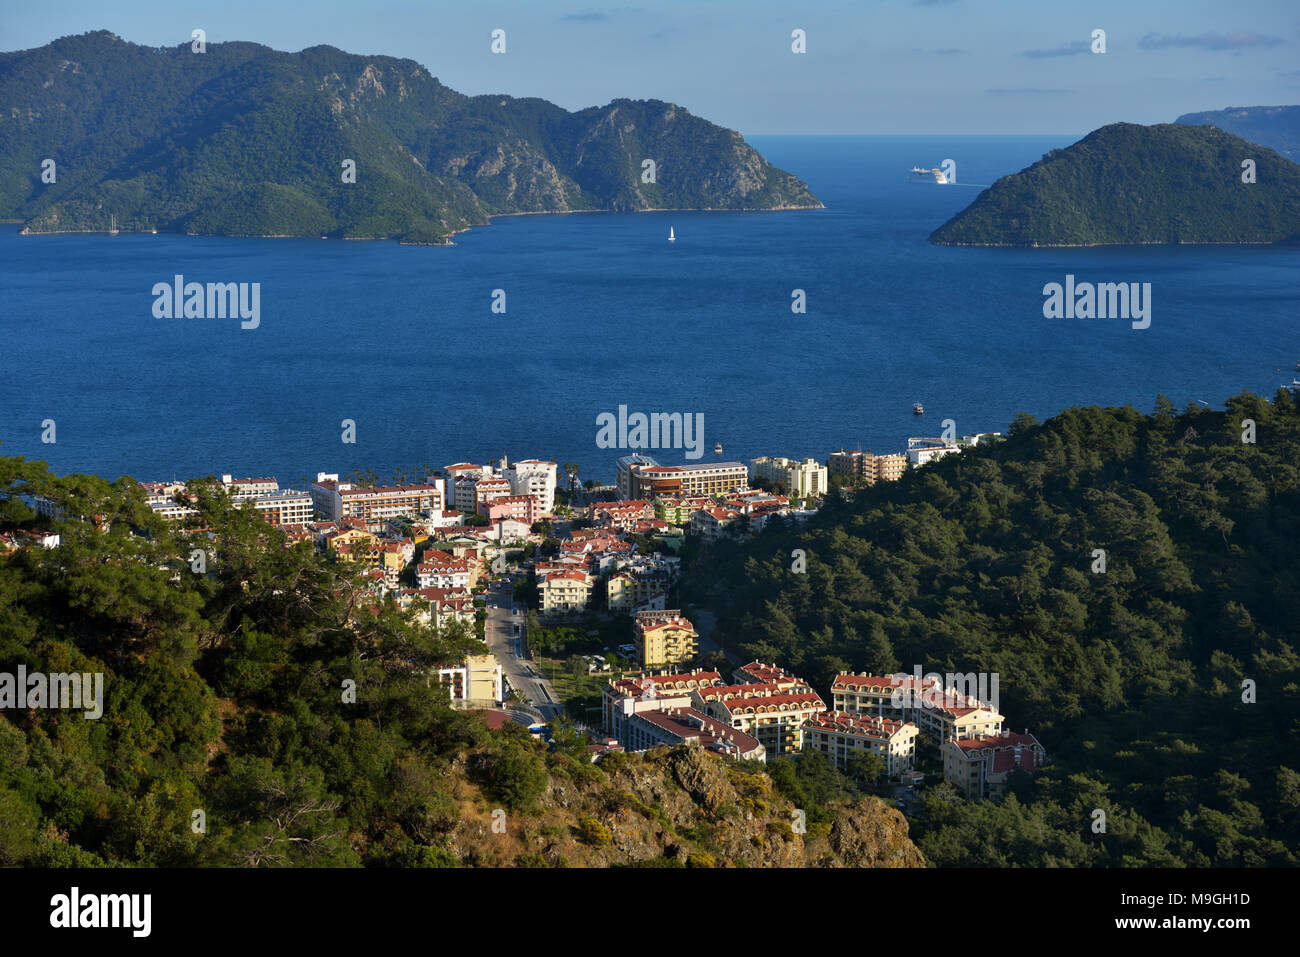 Marmaris, Turkey - April 17, 2014: Aerial view to the bay of Marmais. Marmaris population increases 10 times during the tourism season, and its nightl Stock Photo